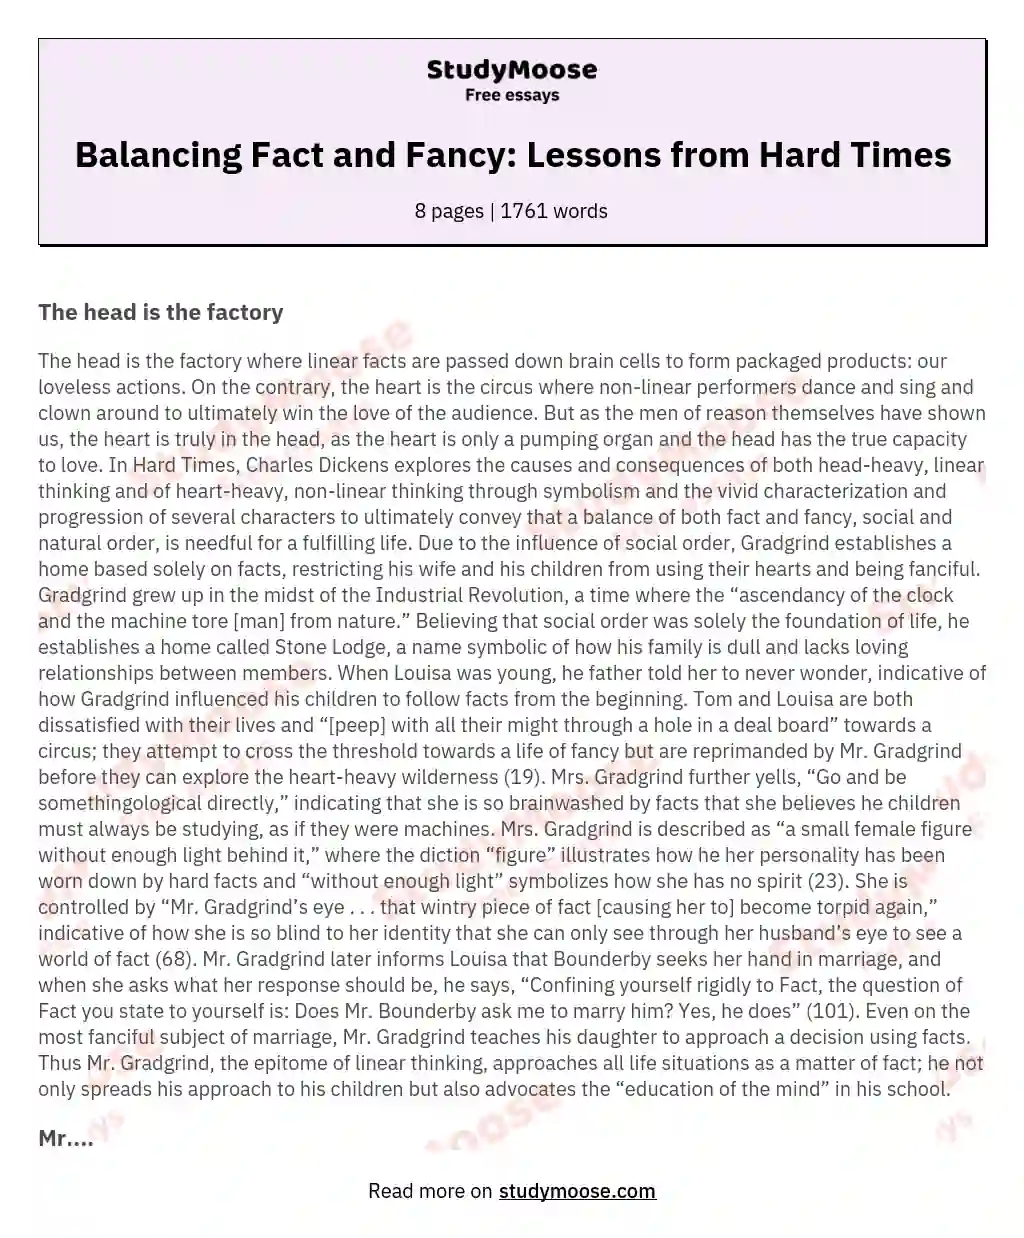 Balancing Fact and Fancy: Lessons from Hard Times essay